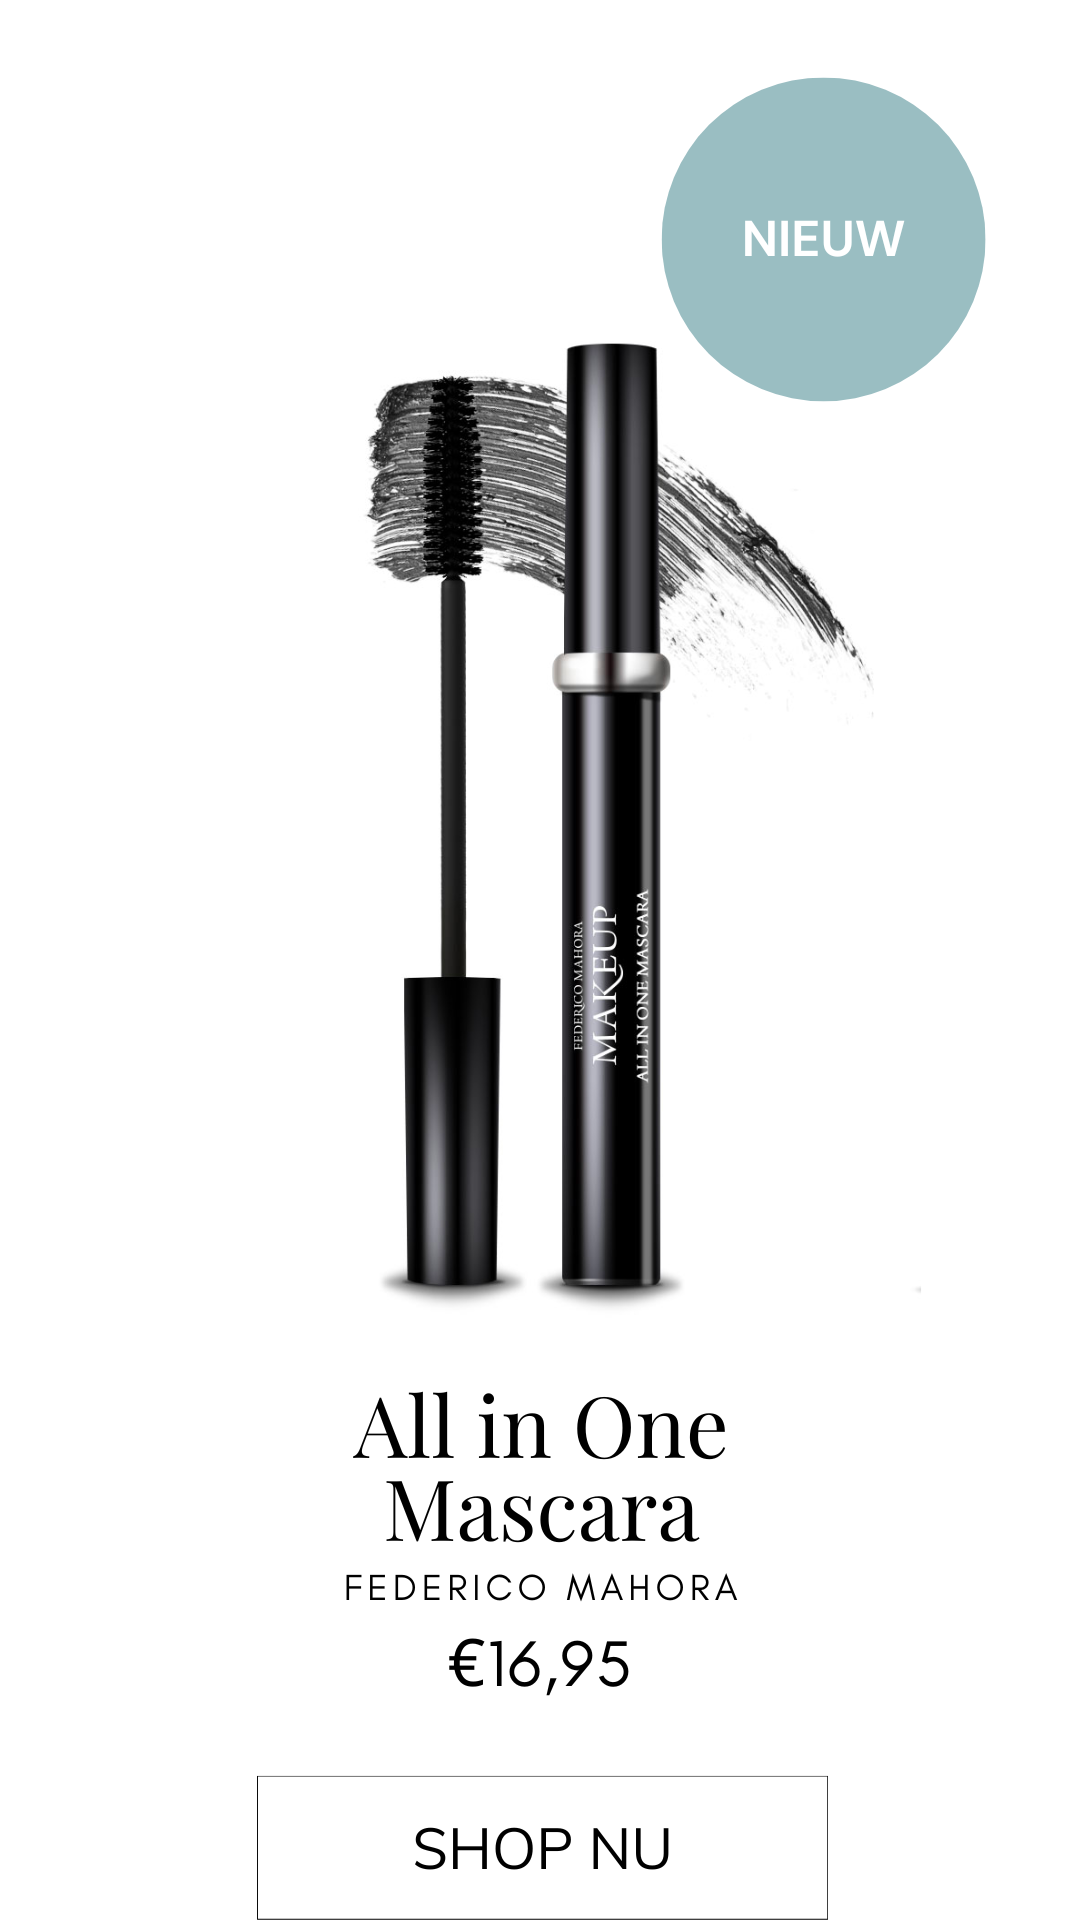 Parfumhuis | All in One Mascara